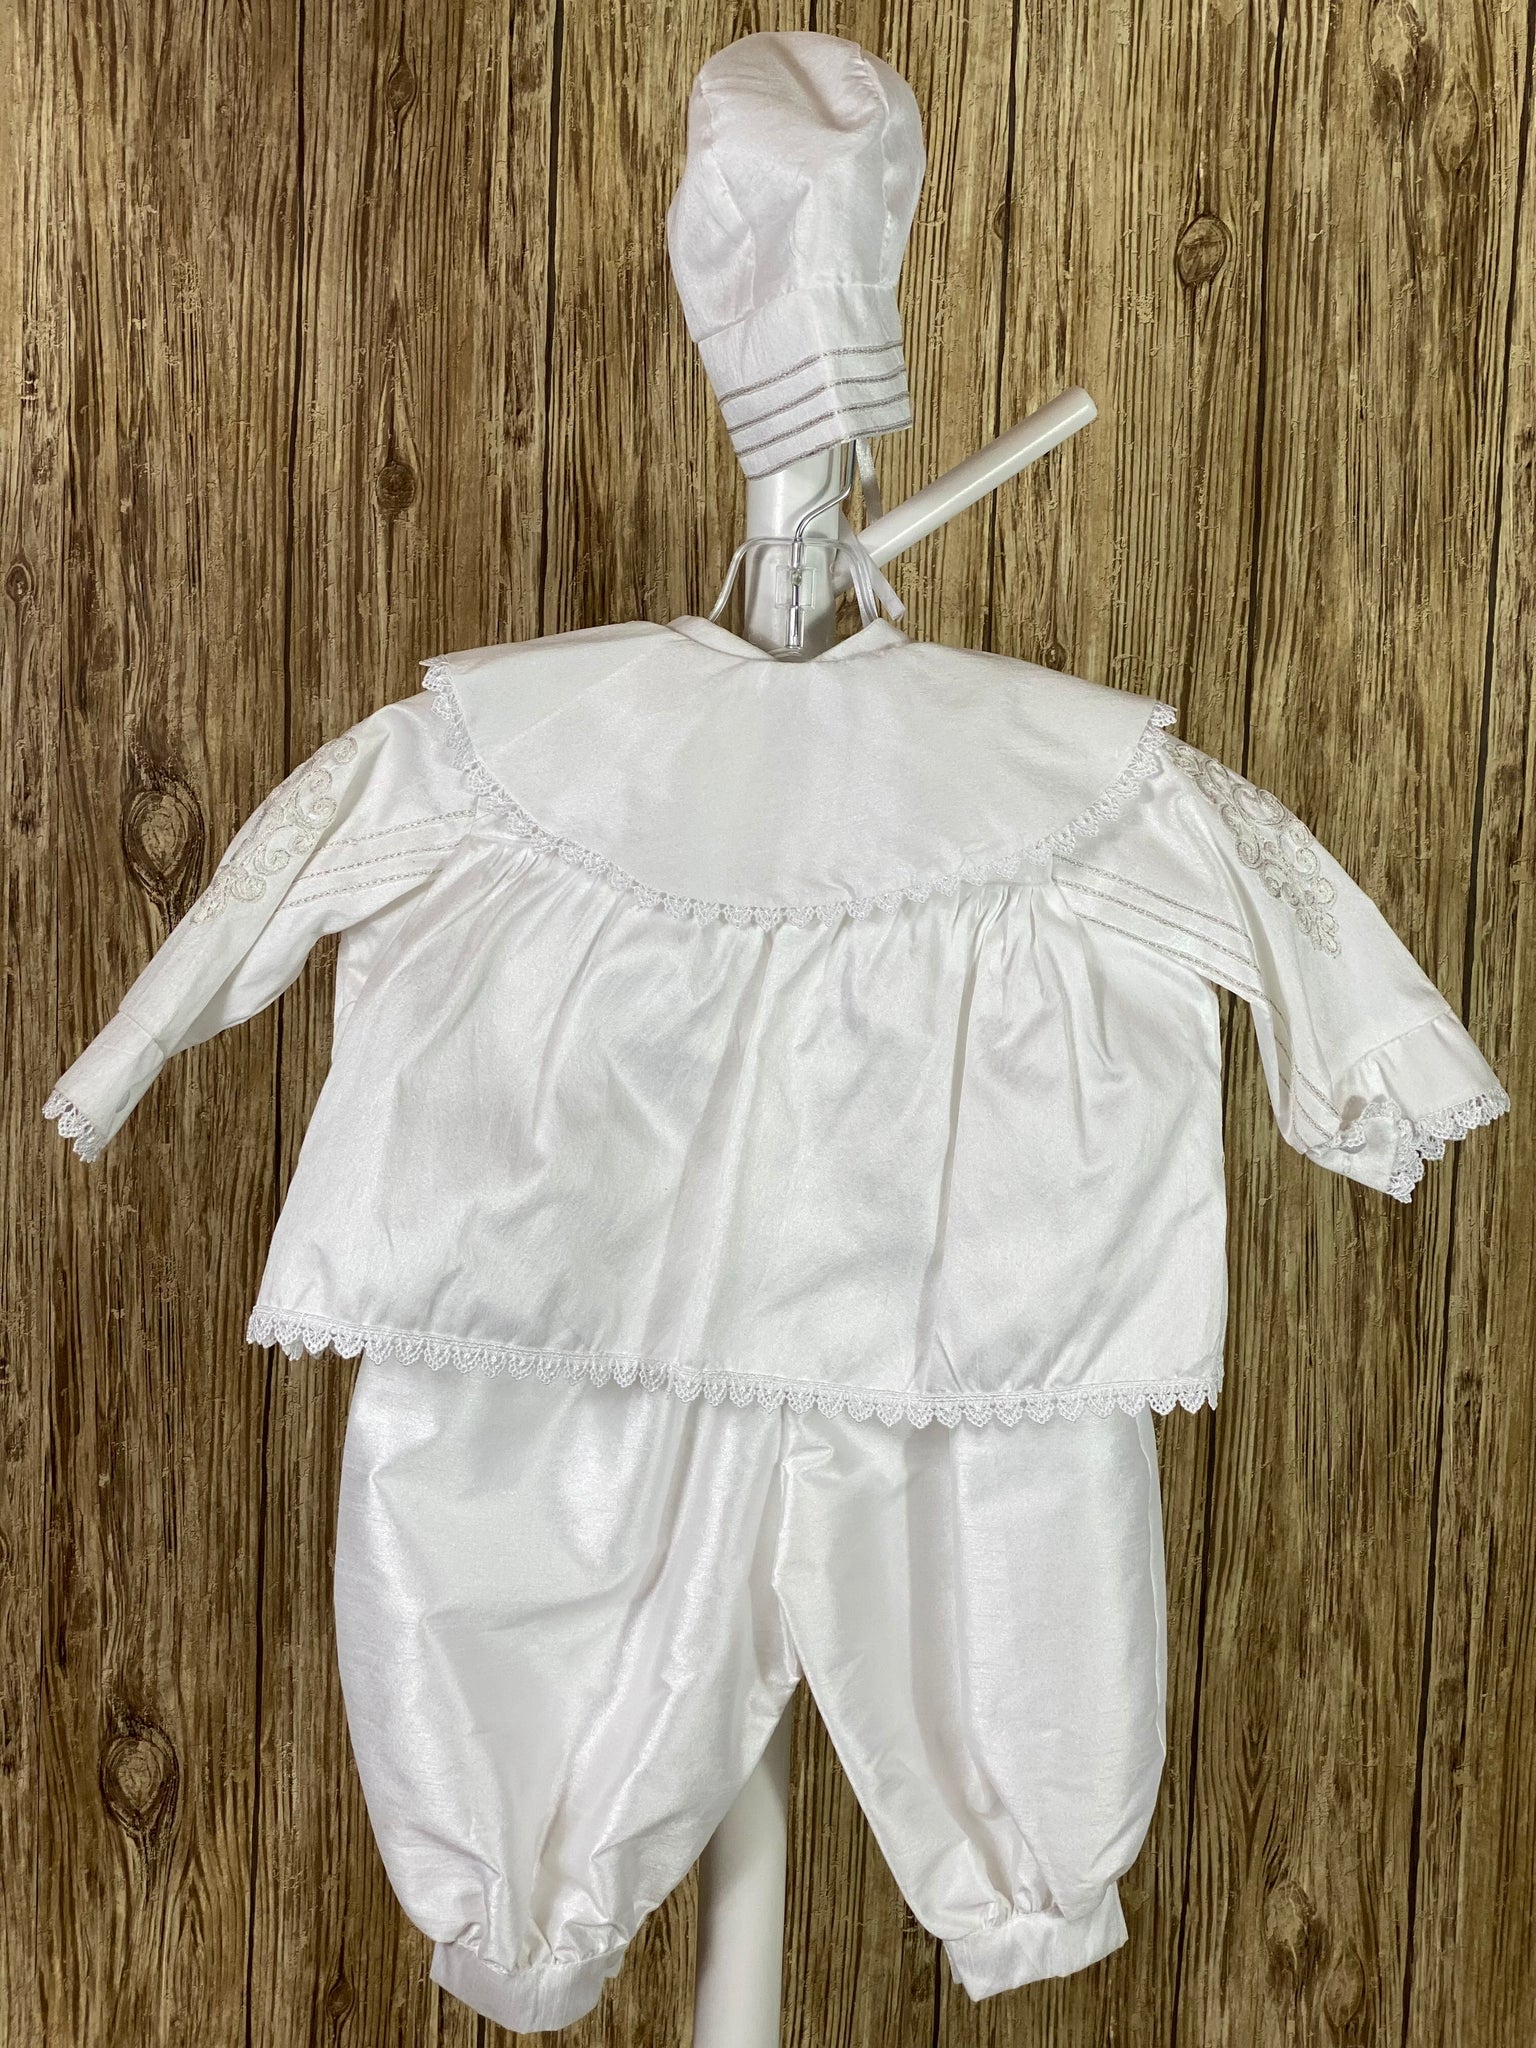 WHITE  3-piece white set with romper, jacket, and bonnet Solid white satin romper with buttons along inside of legs Collard, short sleeve romper Silver rope detailing in L shape on jacket front Silver rope detailing vertical along jacket collar and sleeves Embroidered appliques on jacket front Embroidered trim along jacket, collar, and sleeve edging Ribbon closure on jacket Button closure on back of romper Thin ribbon for tie on bonnet